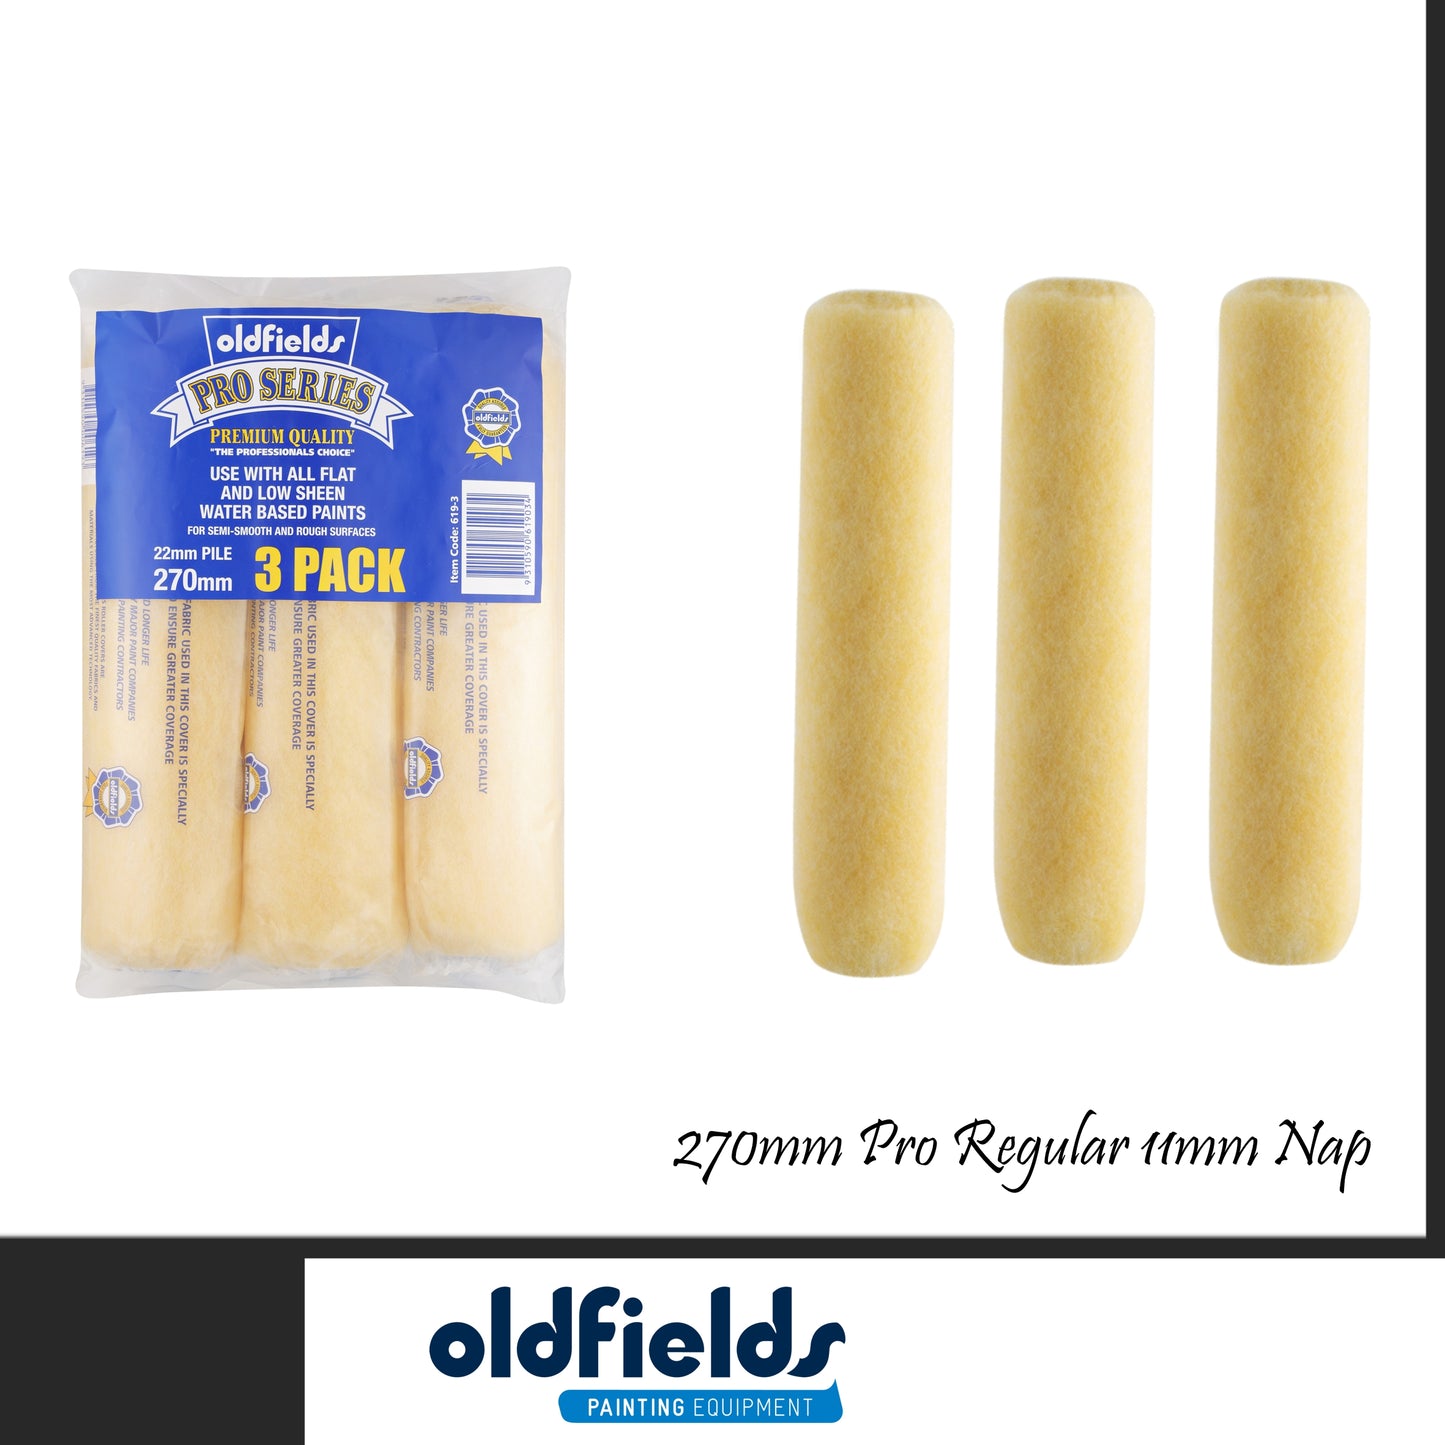 Pro Series Professional 11mm Nap Paint Roller Sleeves from Oldfields